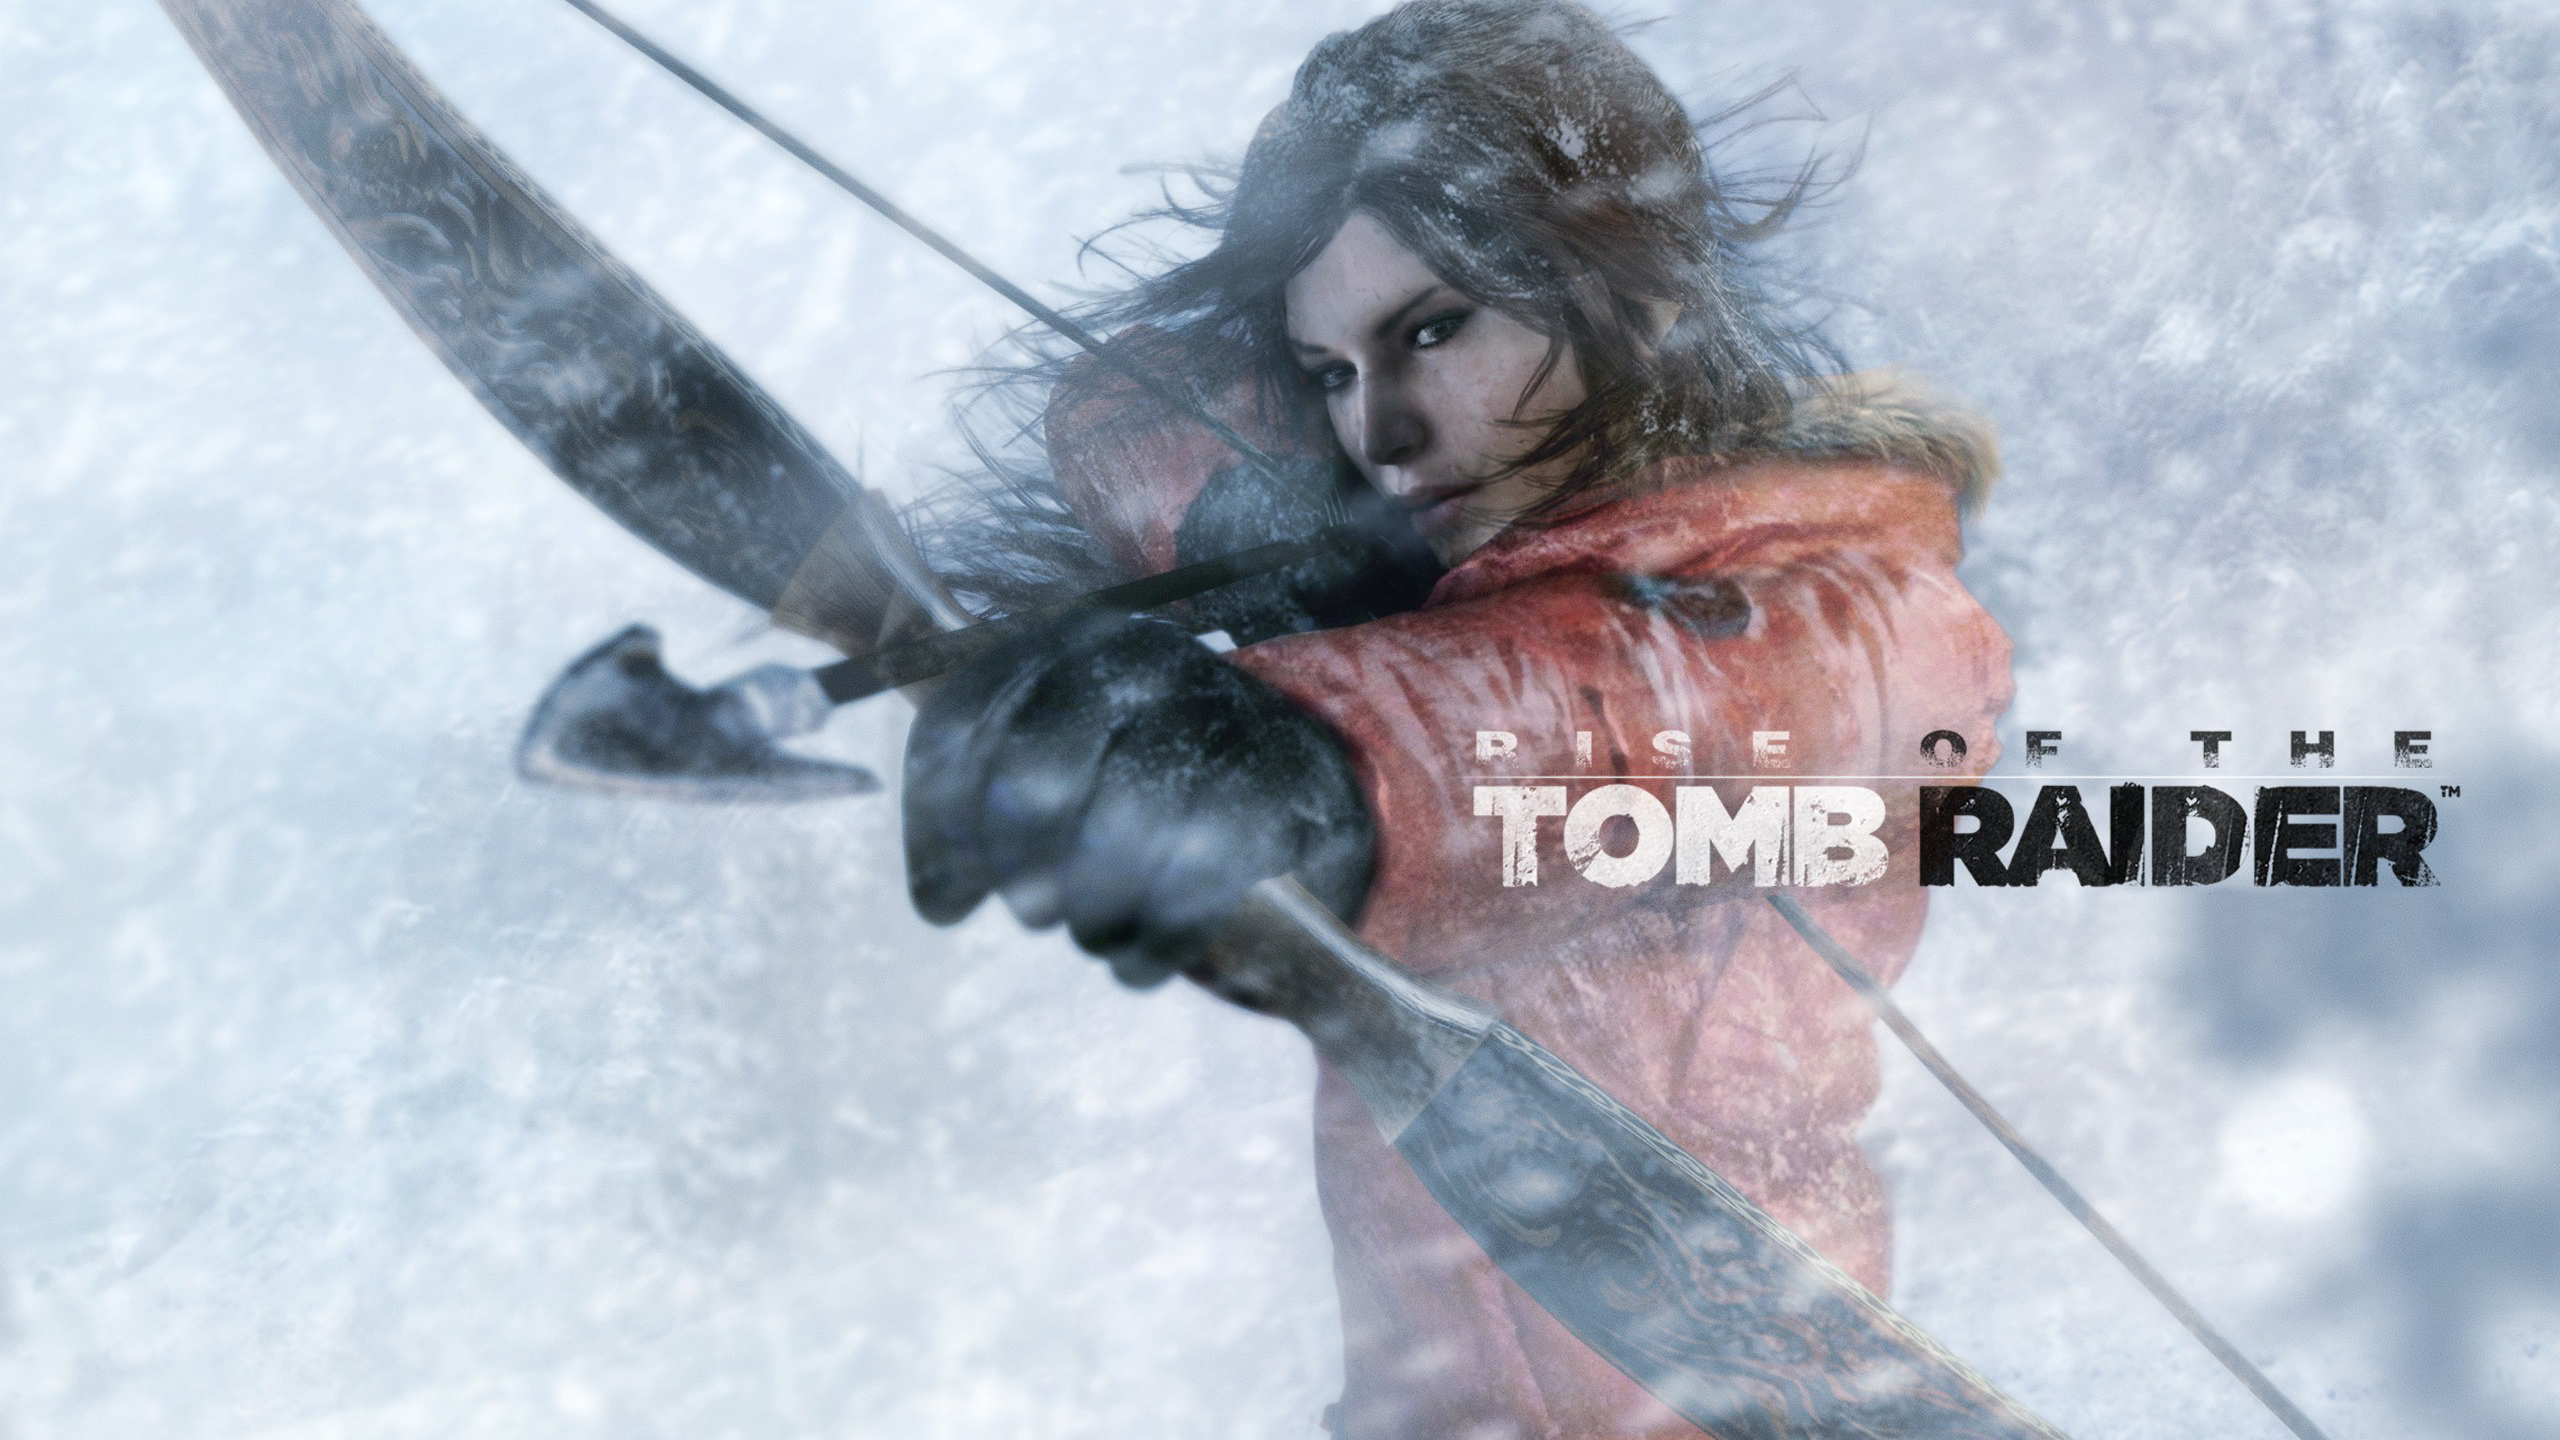 General 2560x1440 PC gaming Rise of the Tomb Raider Tomb Raider Lara Croft (Tomb Raider) aiming bow and arrow cold ice video games video game characters video game girls